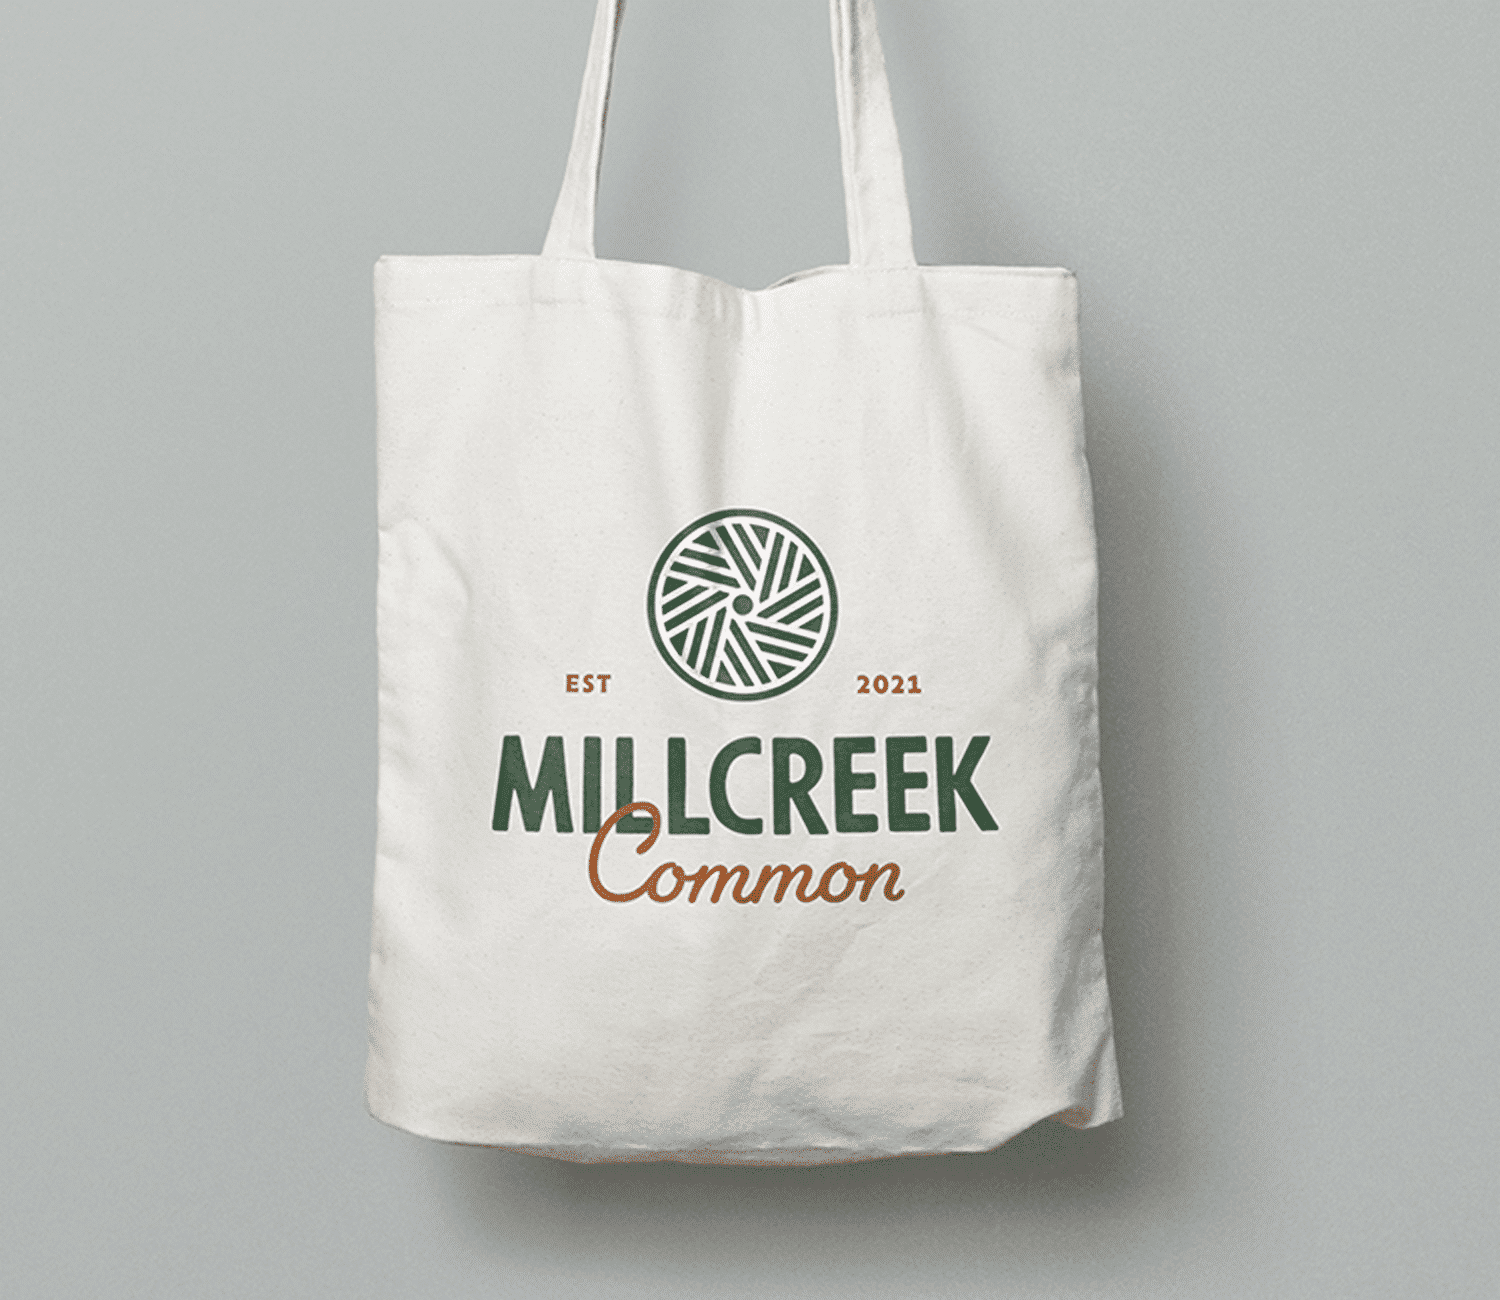 Millcreek Common tote bag with logo on it